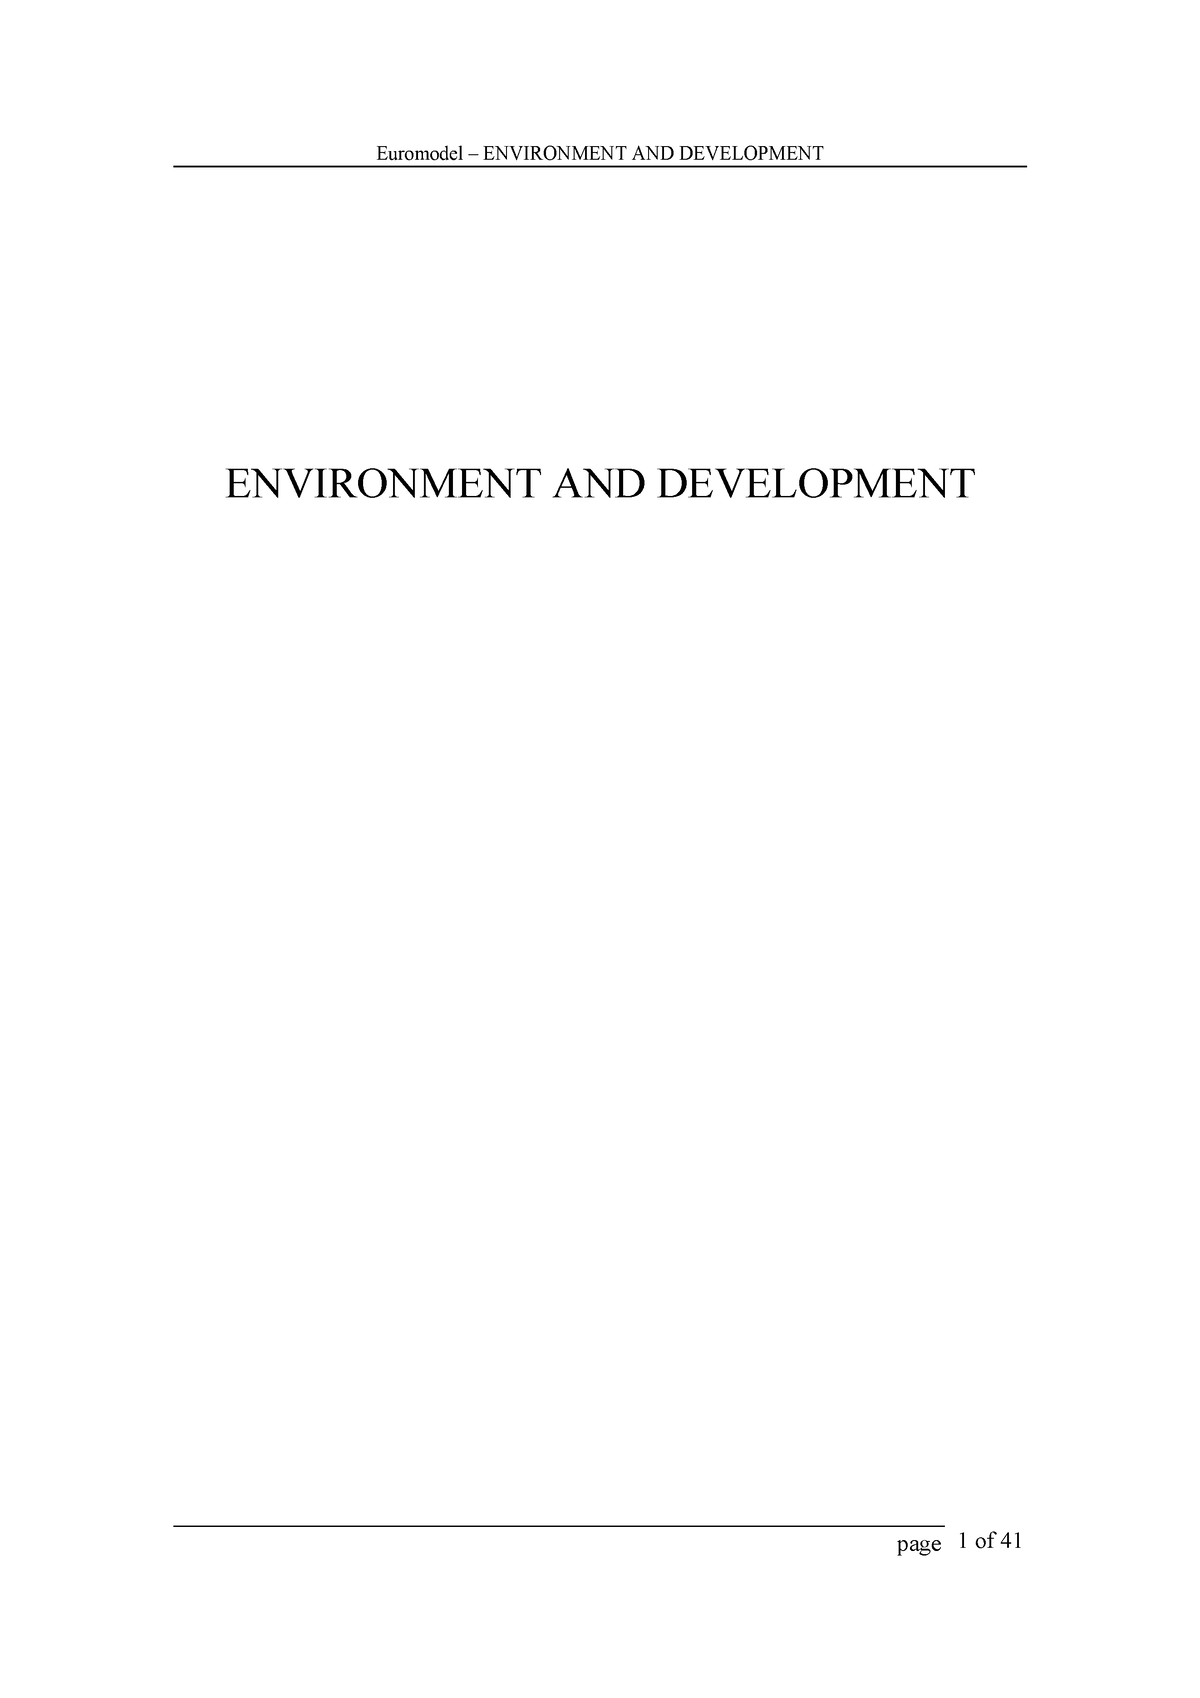 Euromodel- Environment AND Development extra study - ENVIRONMENT AND ...